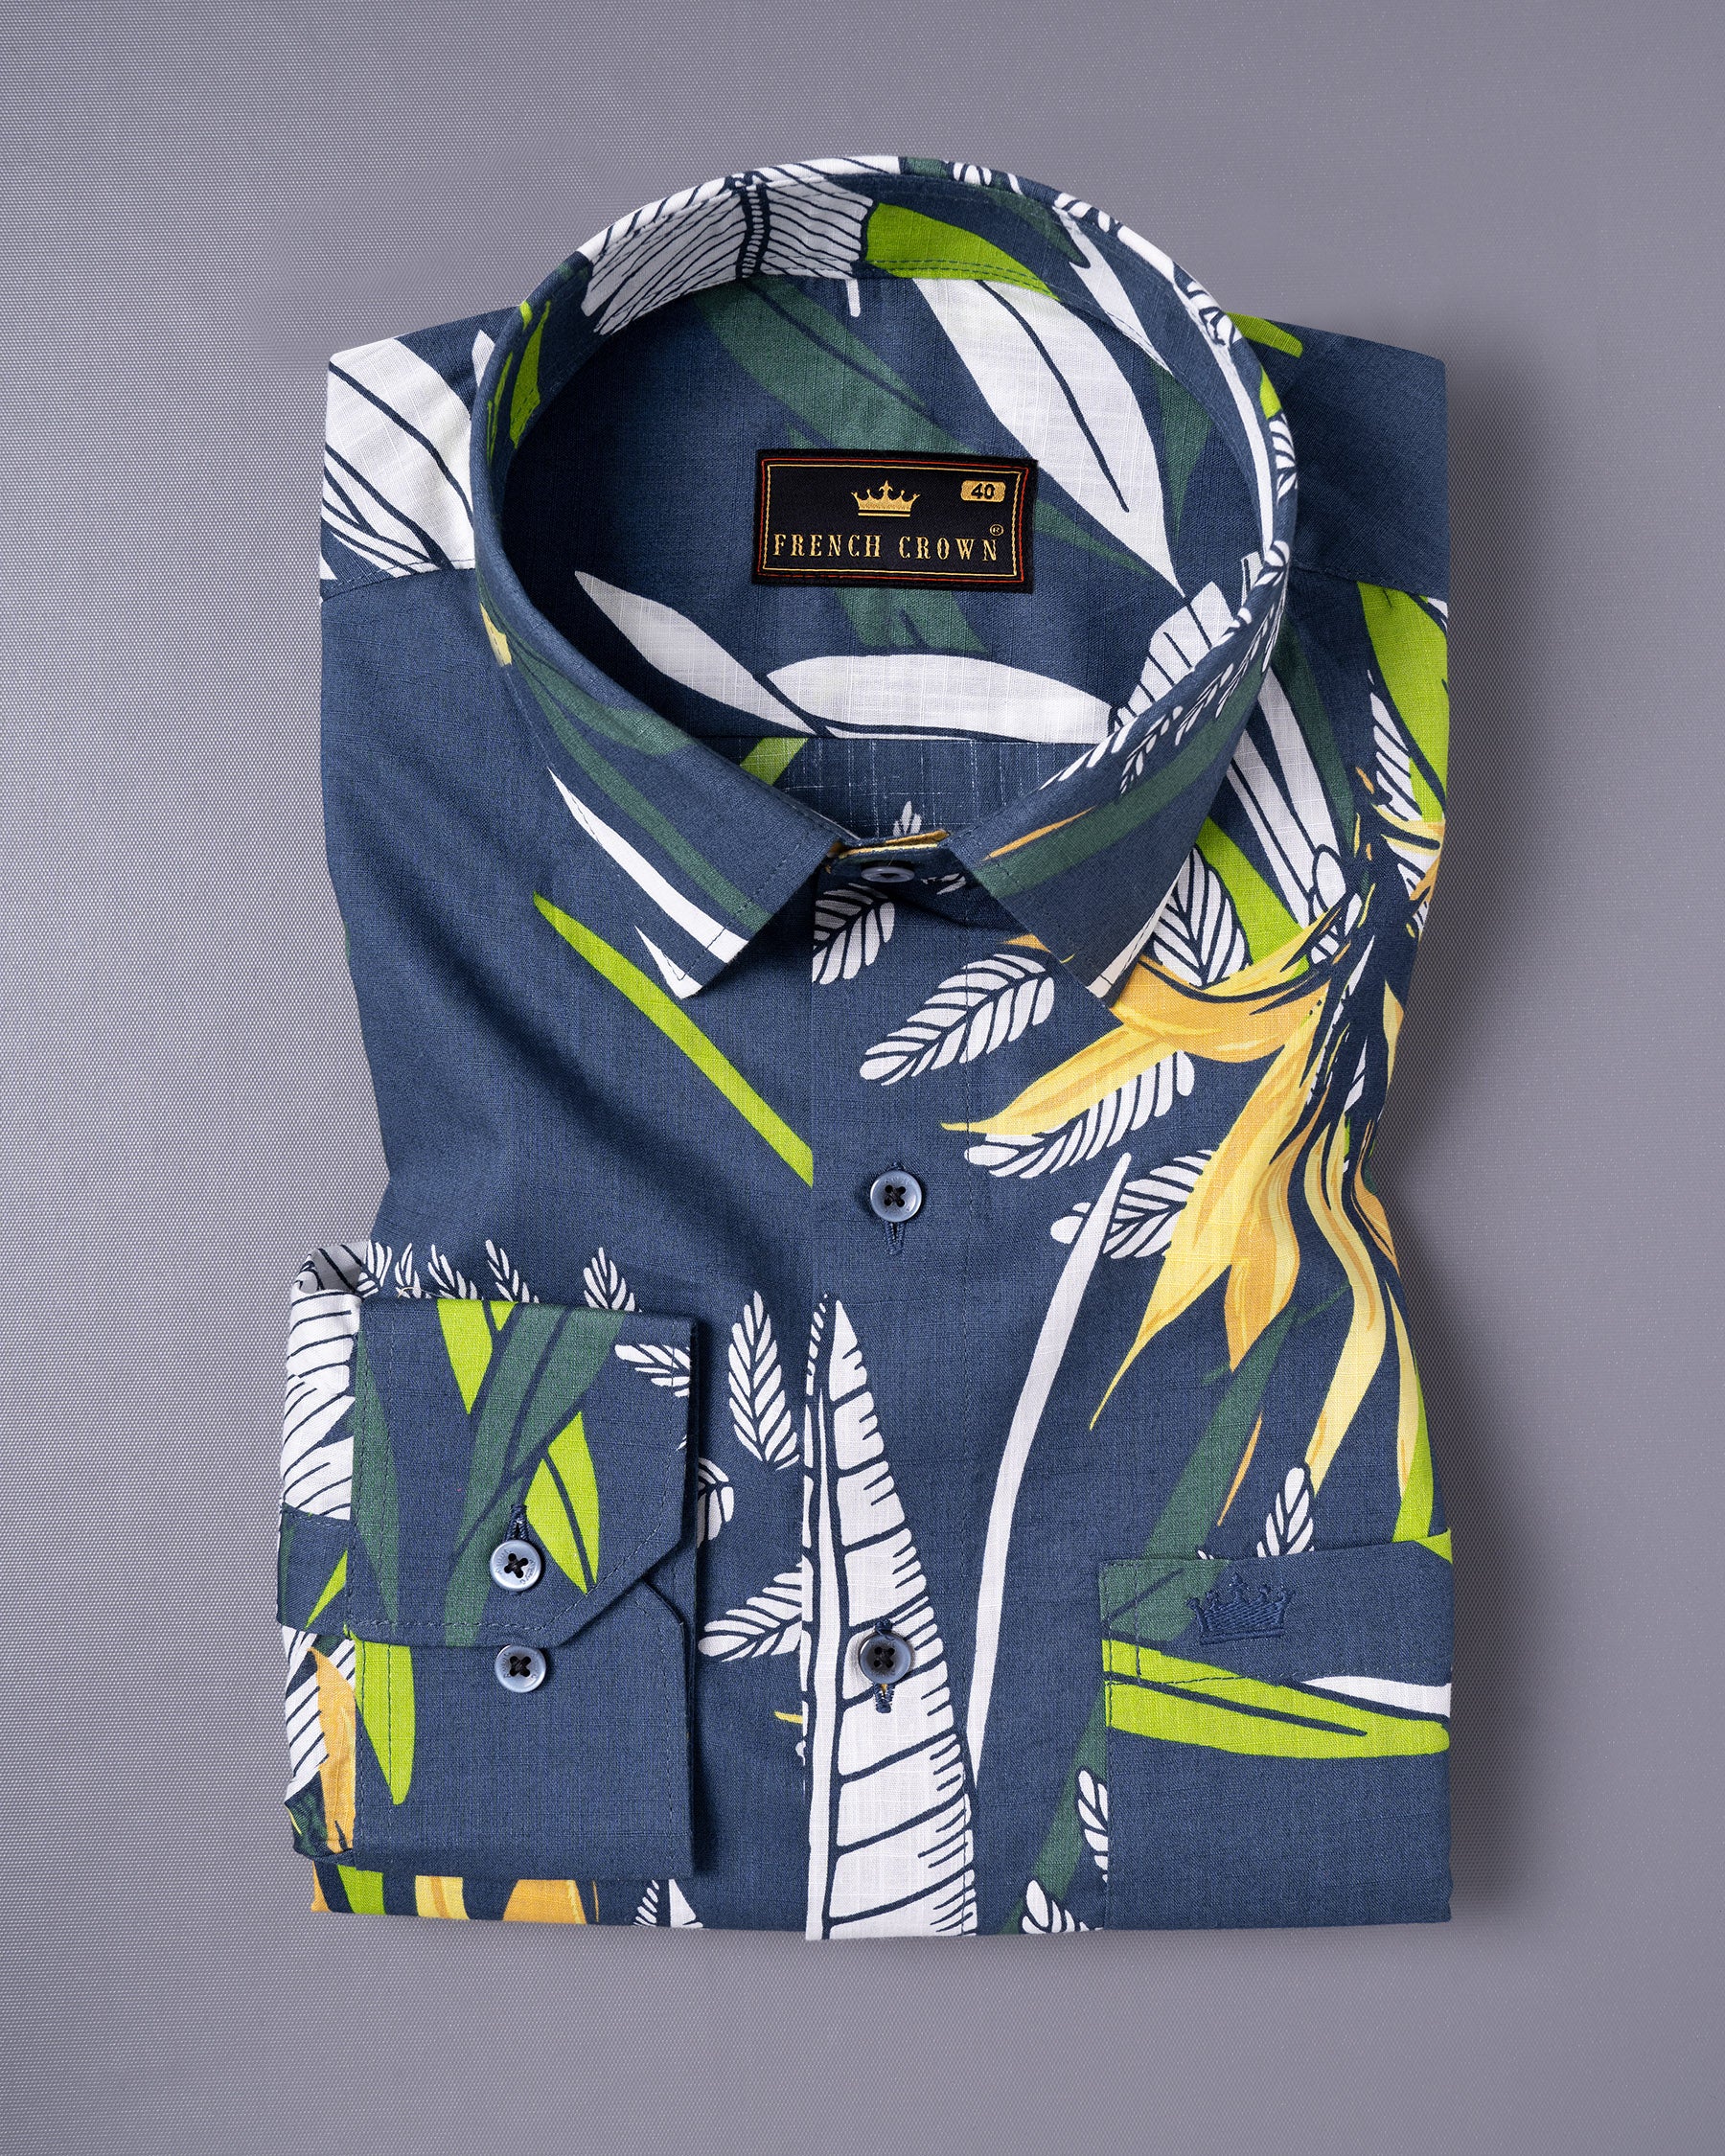 Catalina Blue Leaves Printed Luxurious Linen Shirt 5042-BLE-38, 5042-BLE-H-38, 5042-BLE-39, 5042-BLE-H-39, 5042-BLE-40, 5042-BLE-H-40, 5042-BLE-42, 5042-BLE-H-42, 5042-BLE-44, 5042-BLE-H-44, 5042-BLE-46, 5042-BLE-H-46, 5042-BLE-48, 5042-BLE-H-48, 5042-BLE-50, 5042-BLE-H-50, 5042-BLE-52, 5042-BLE-H-52